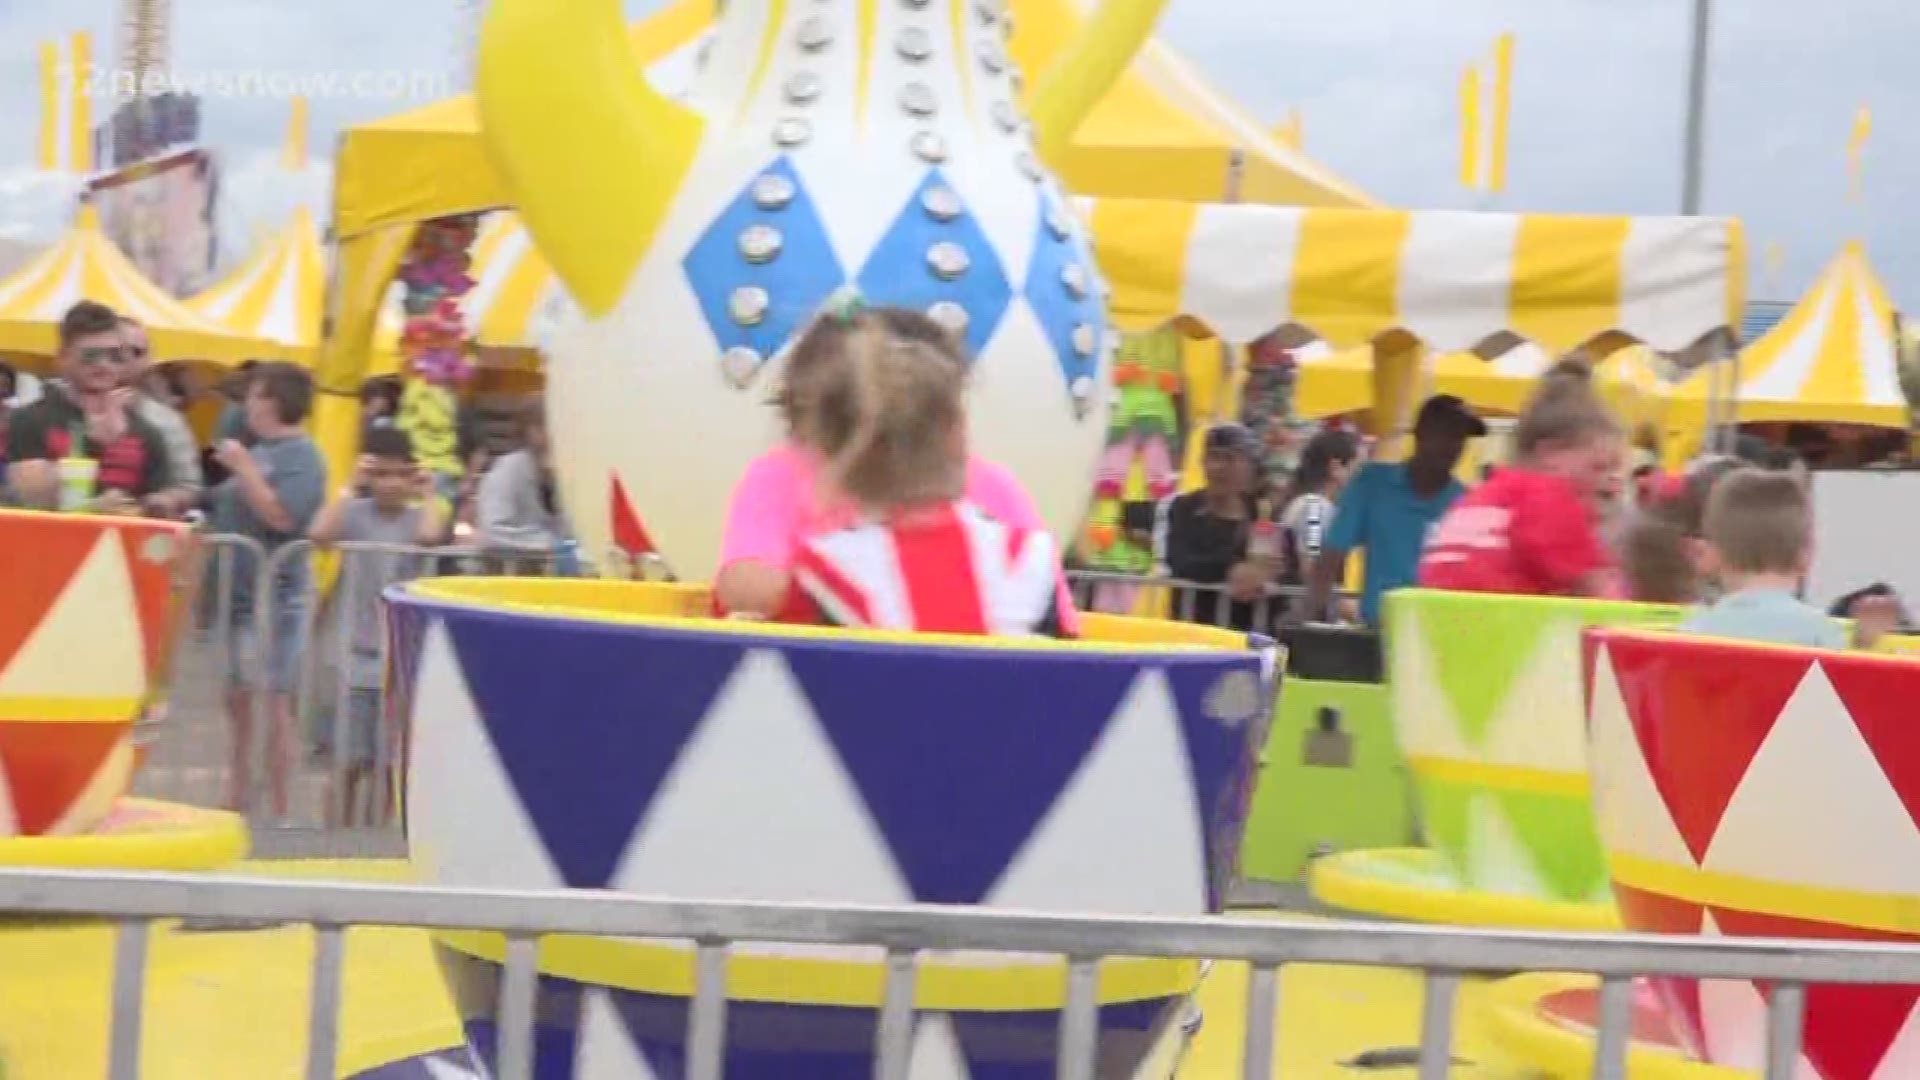 The South Texas State Fair has become a family tradition for many Southeast Texans.